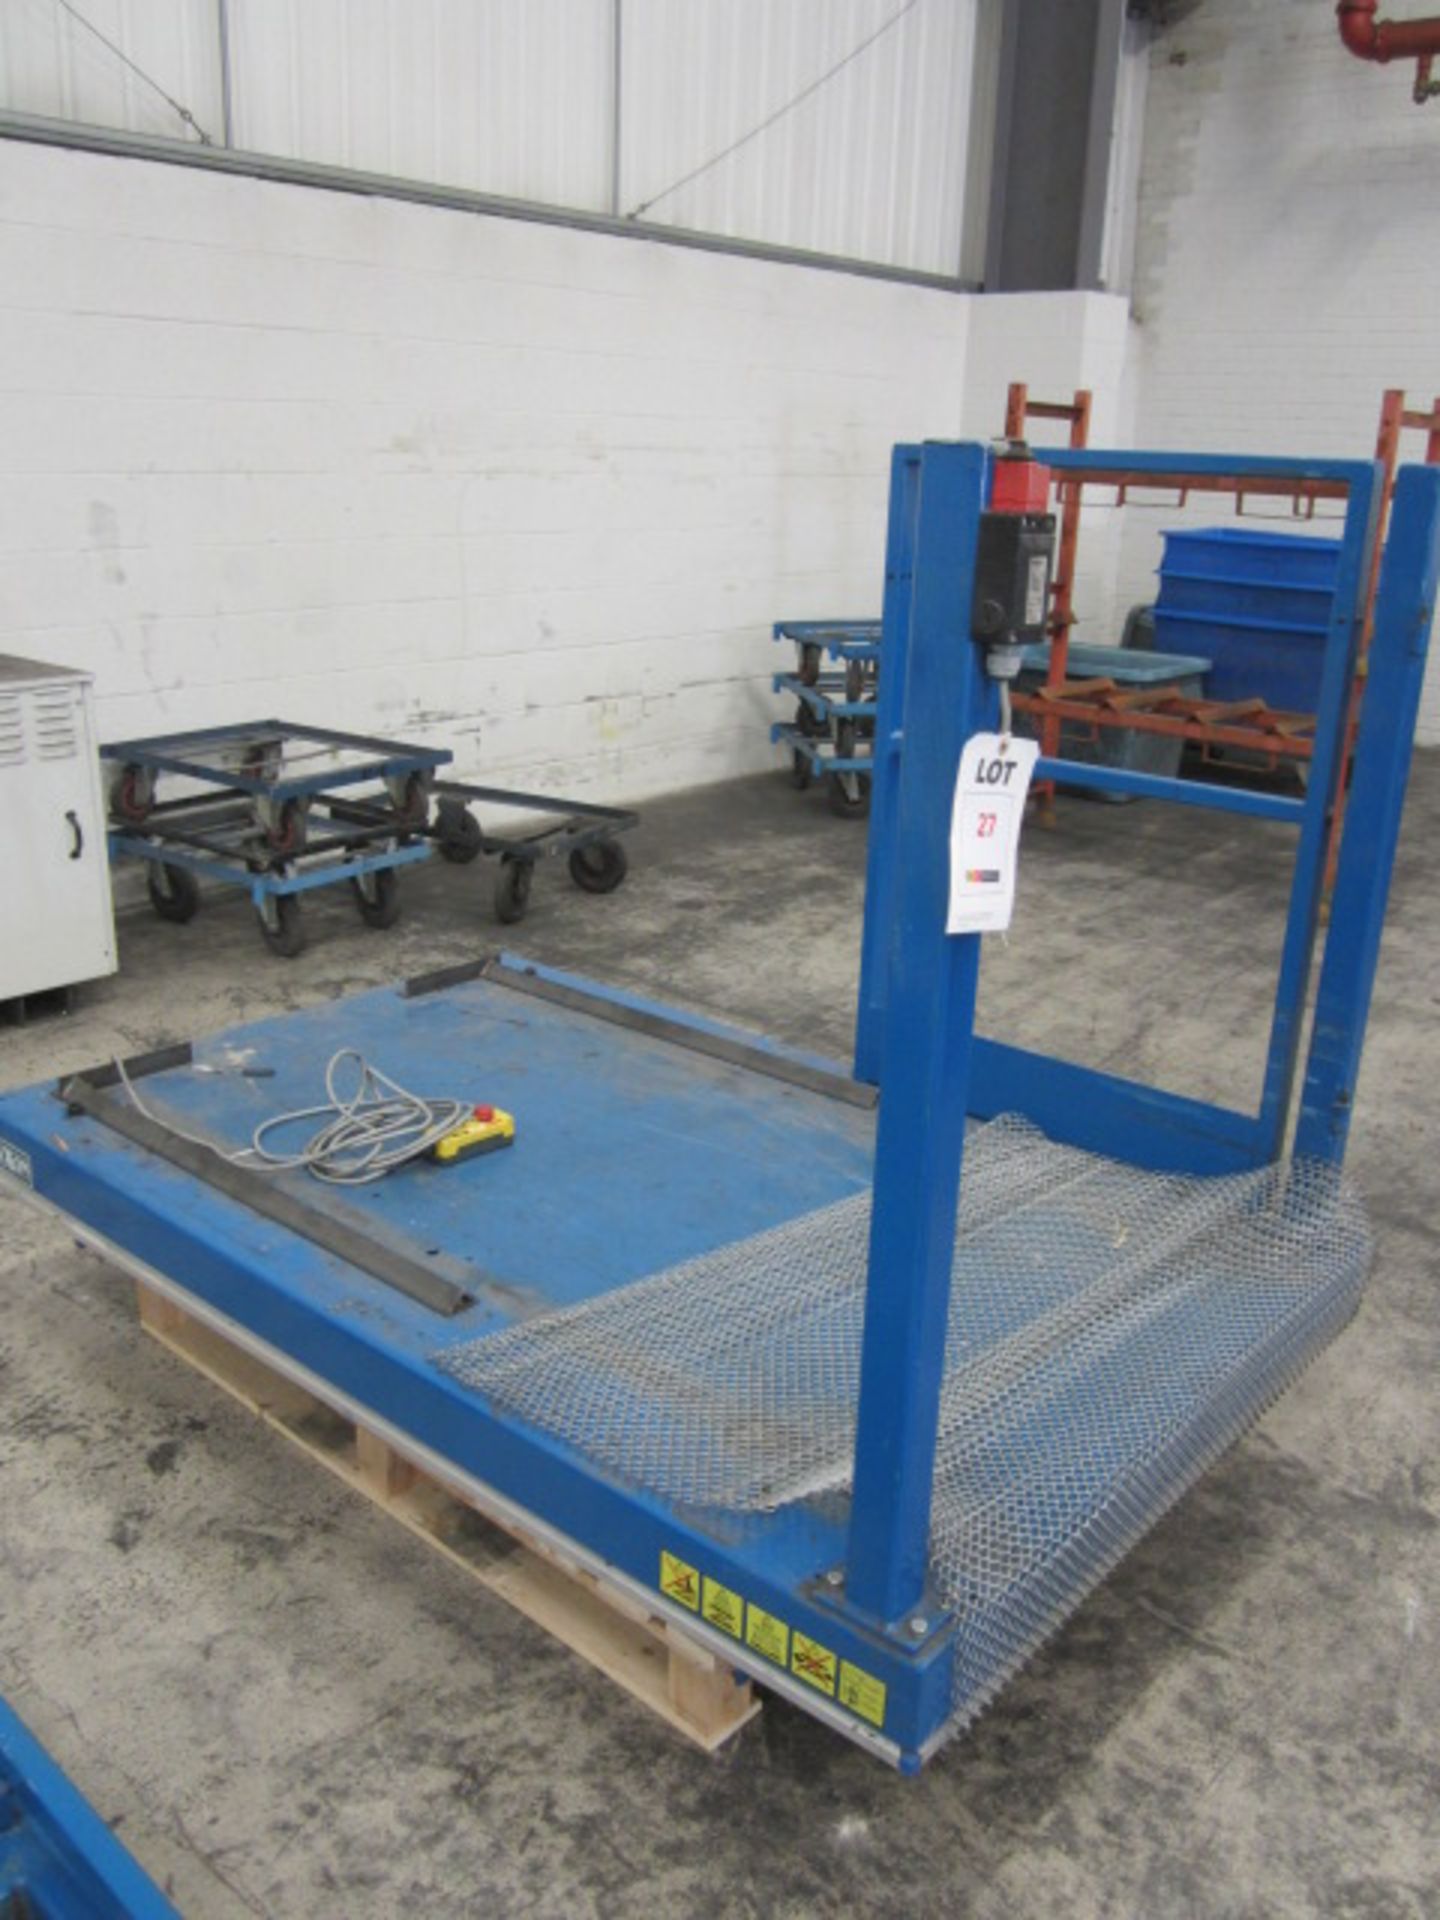 Saxon hydraulic lift table, approx. table size 1.9m x 1m with smeshed side, SWL 500kgs - dismantled. - Image 3 of 8